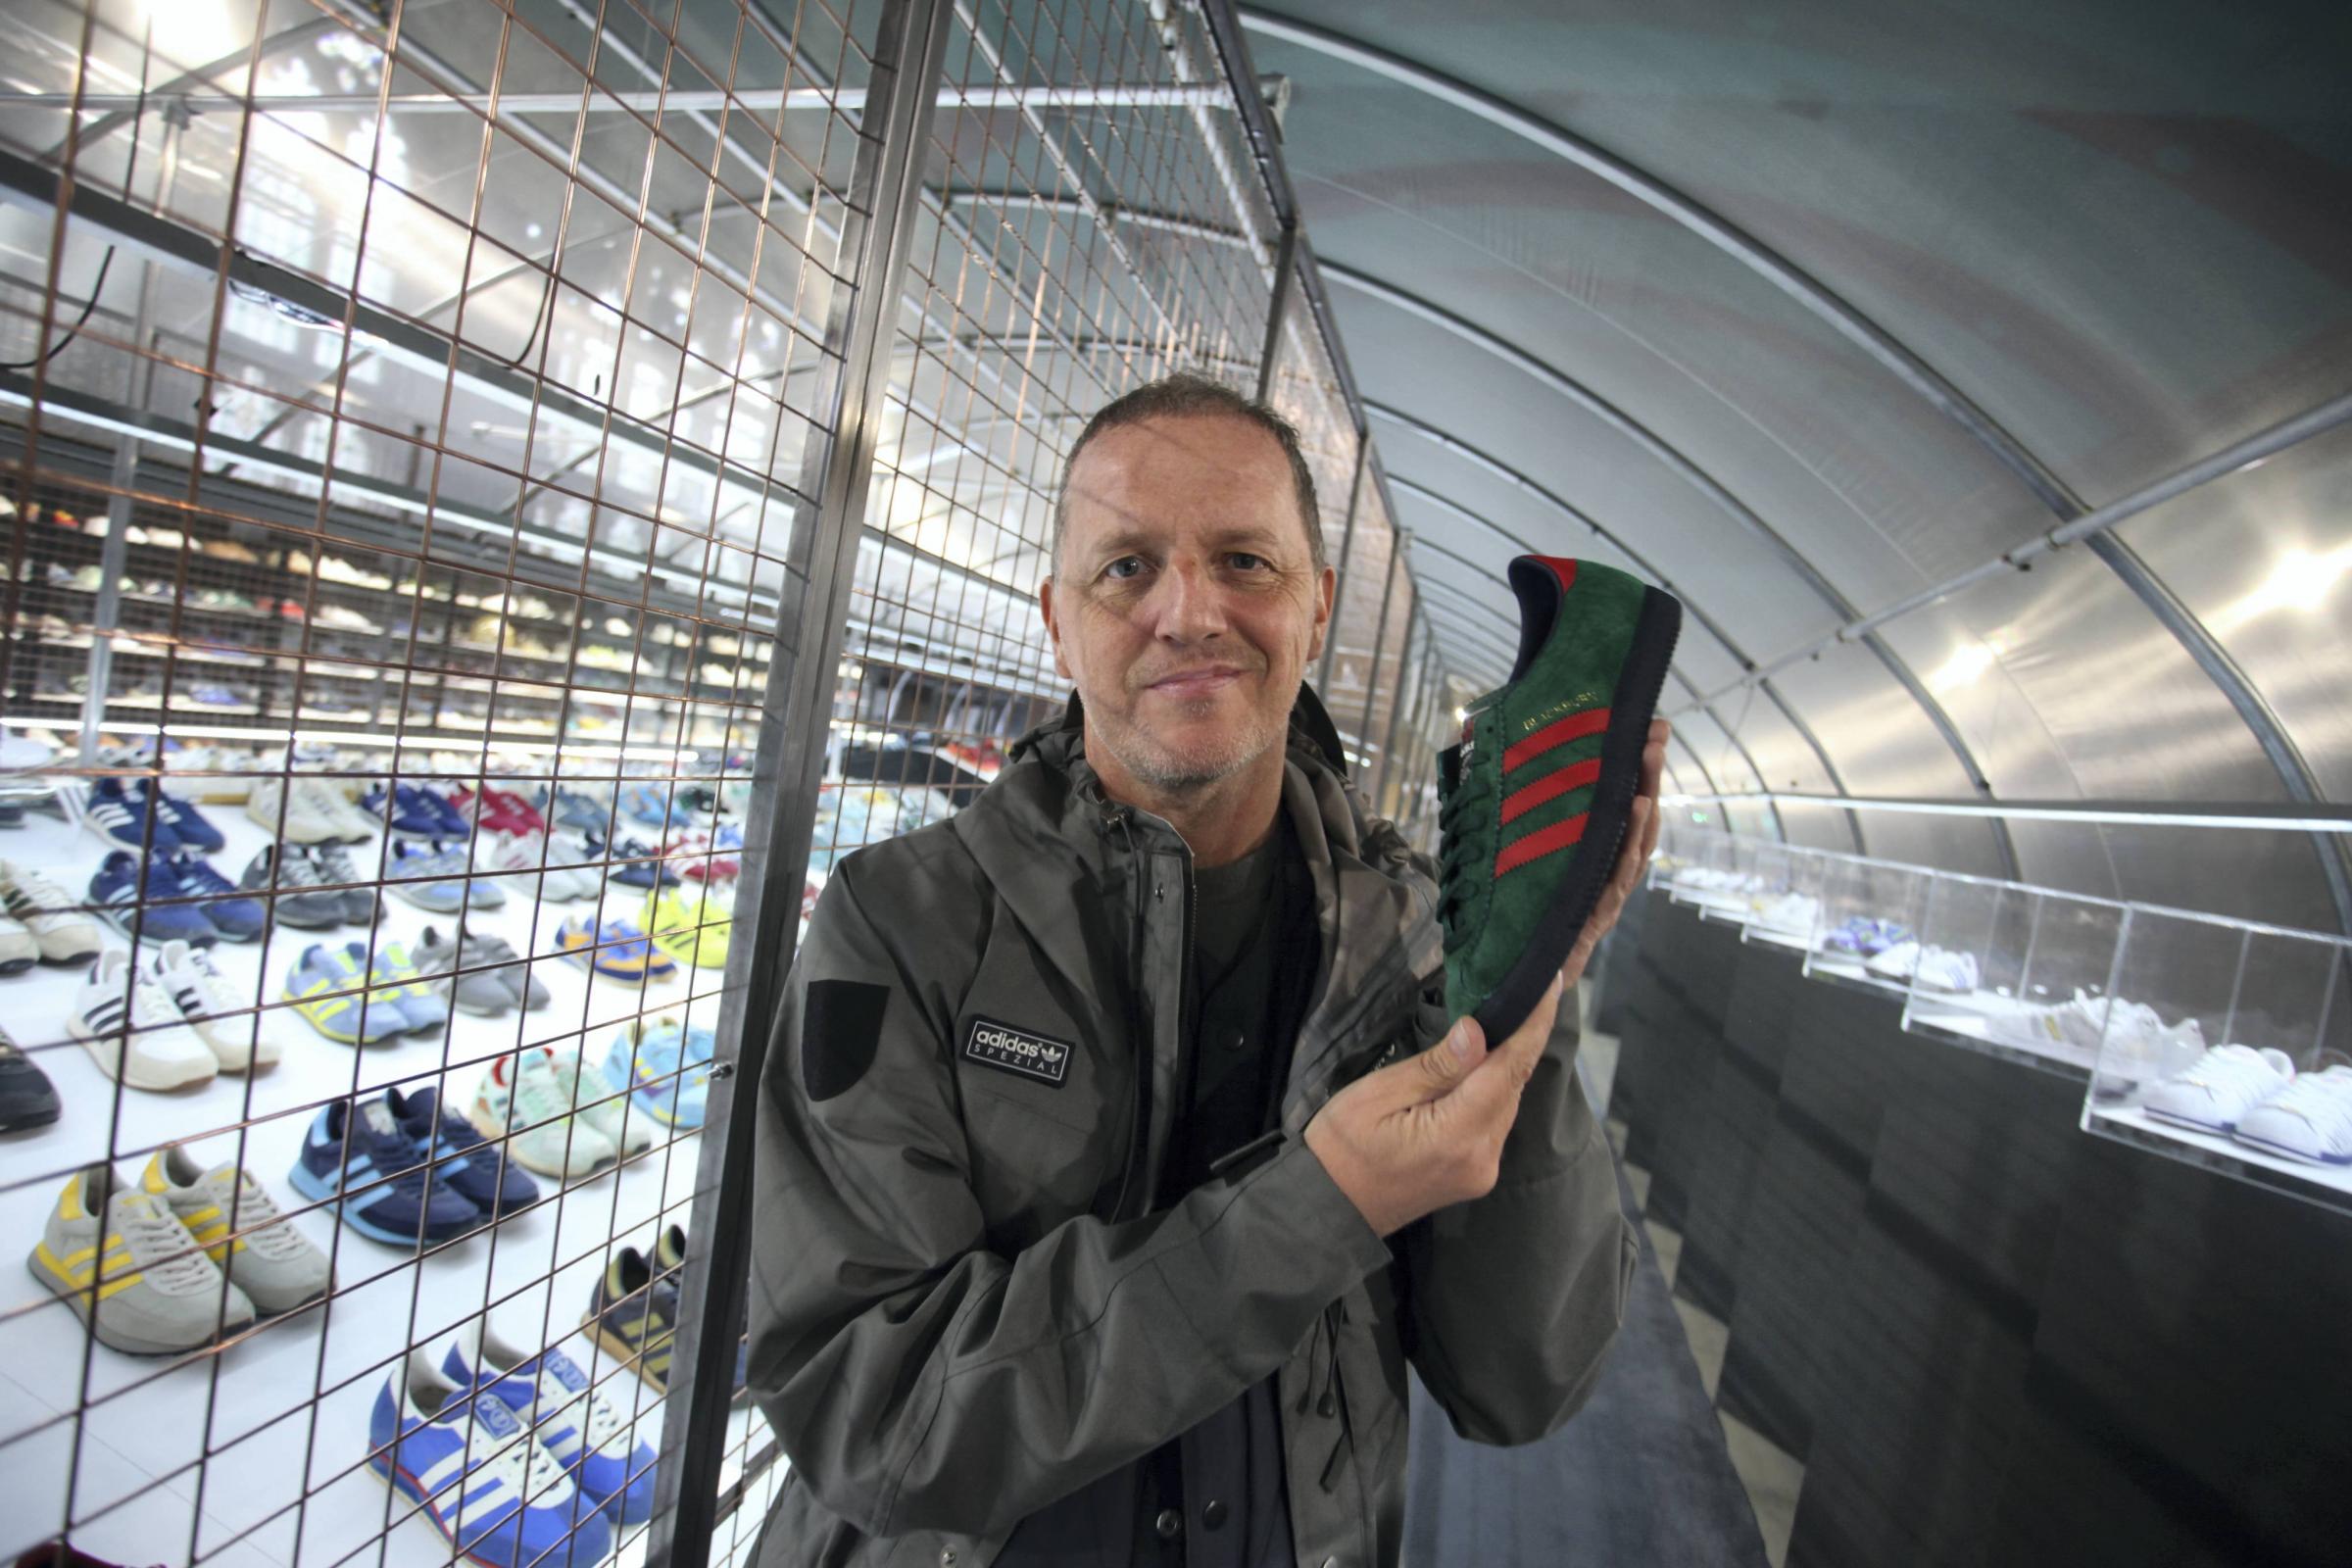 Gary Aspden with the Adidas Blackburn Spezial trainer at The Cotton Exchange, part of the British Textile Biennial, 2019